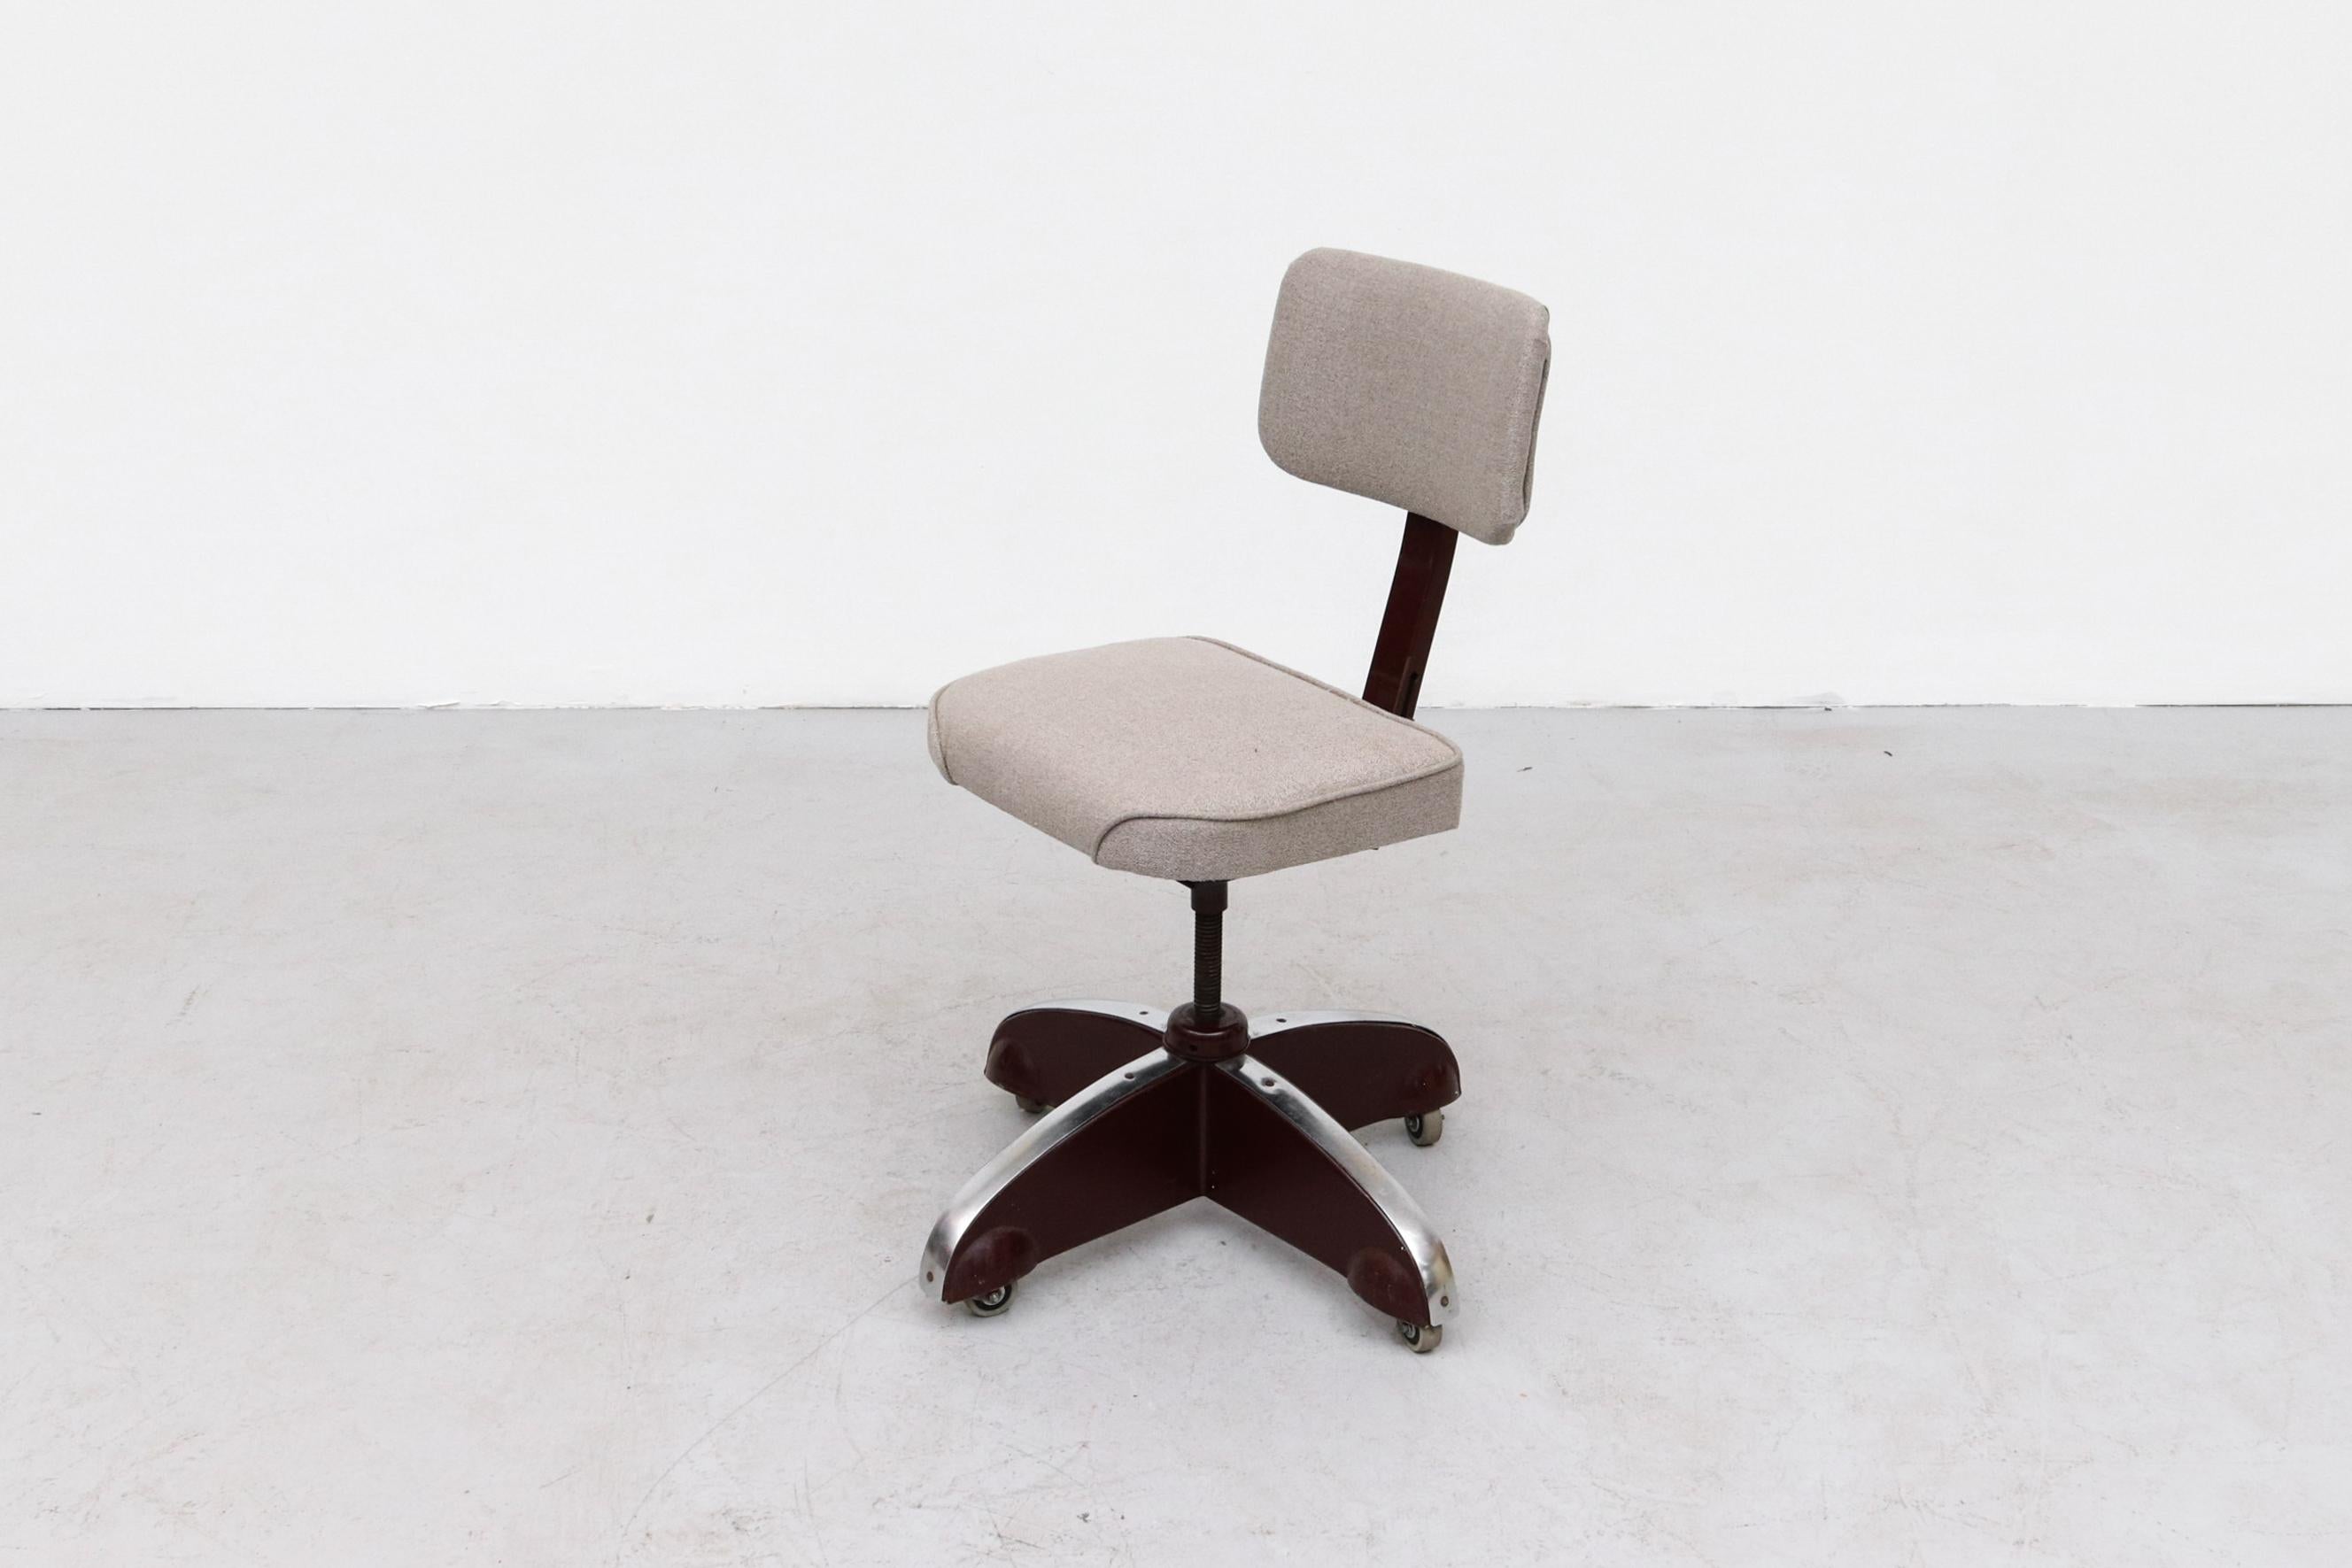 Mid-20th Century Ahrend De Cirkel Industrial Rolling Office Chair in Plum with Gray Upholstery For Sale